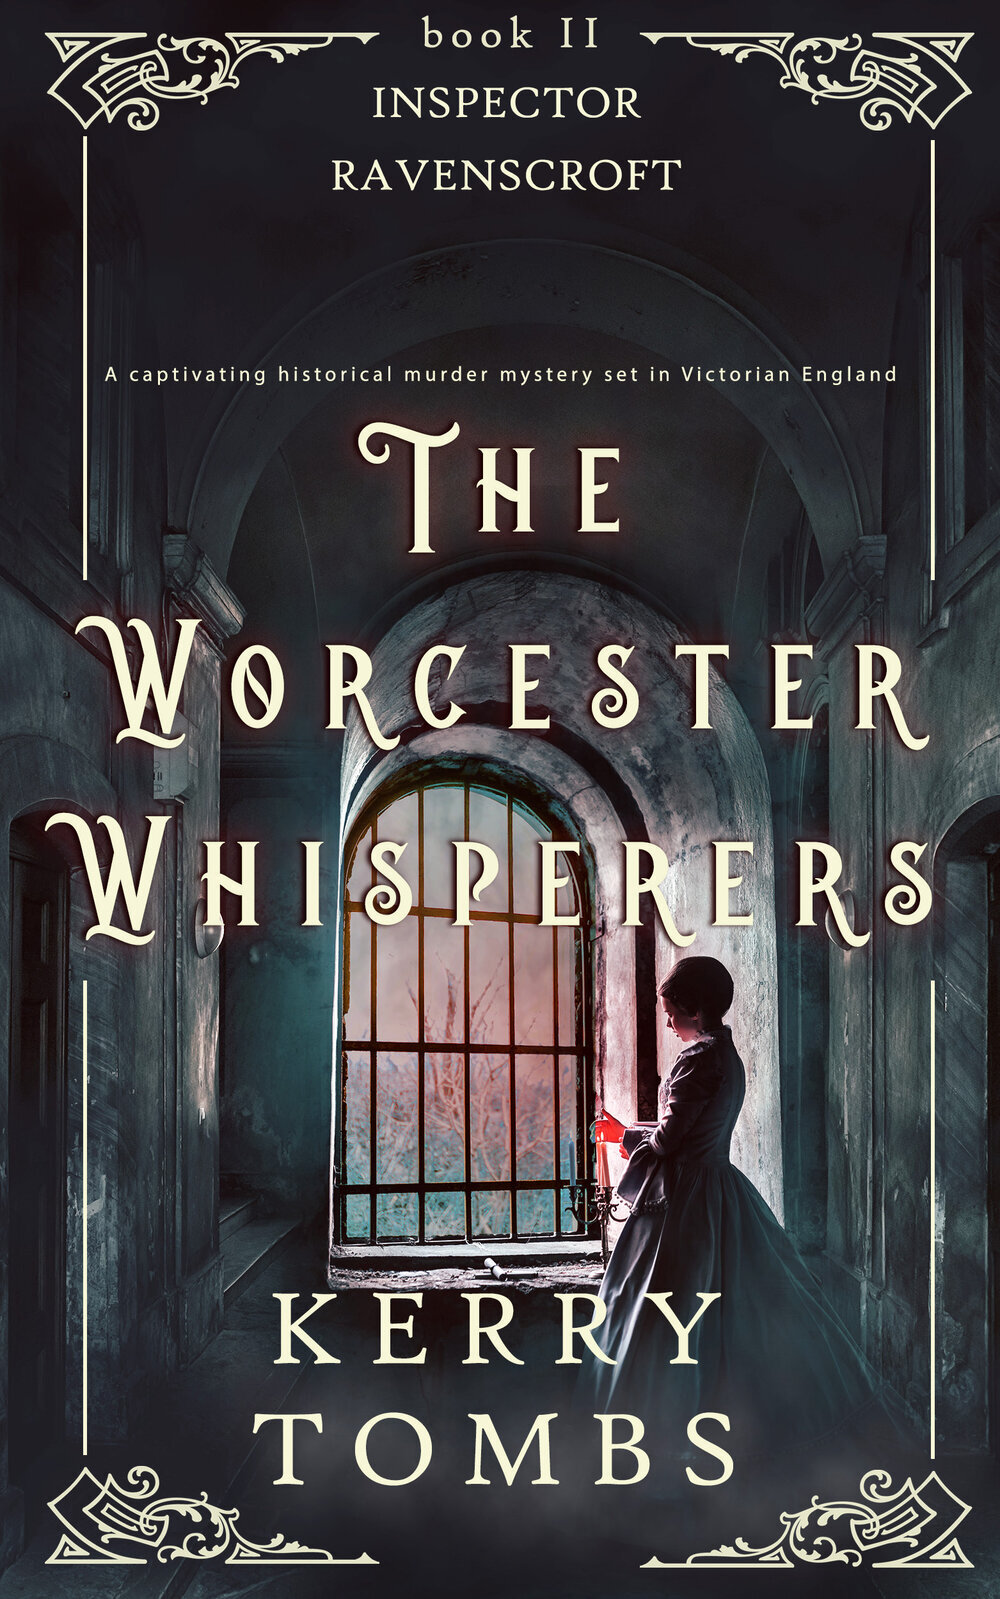 THE+WORCESTER+WHISPERERS+PUBLISH+cover+2.jpg